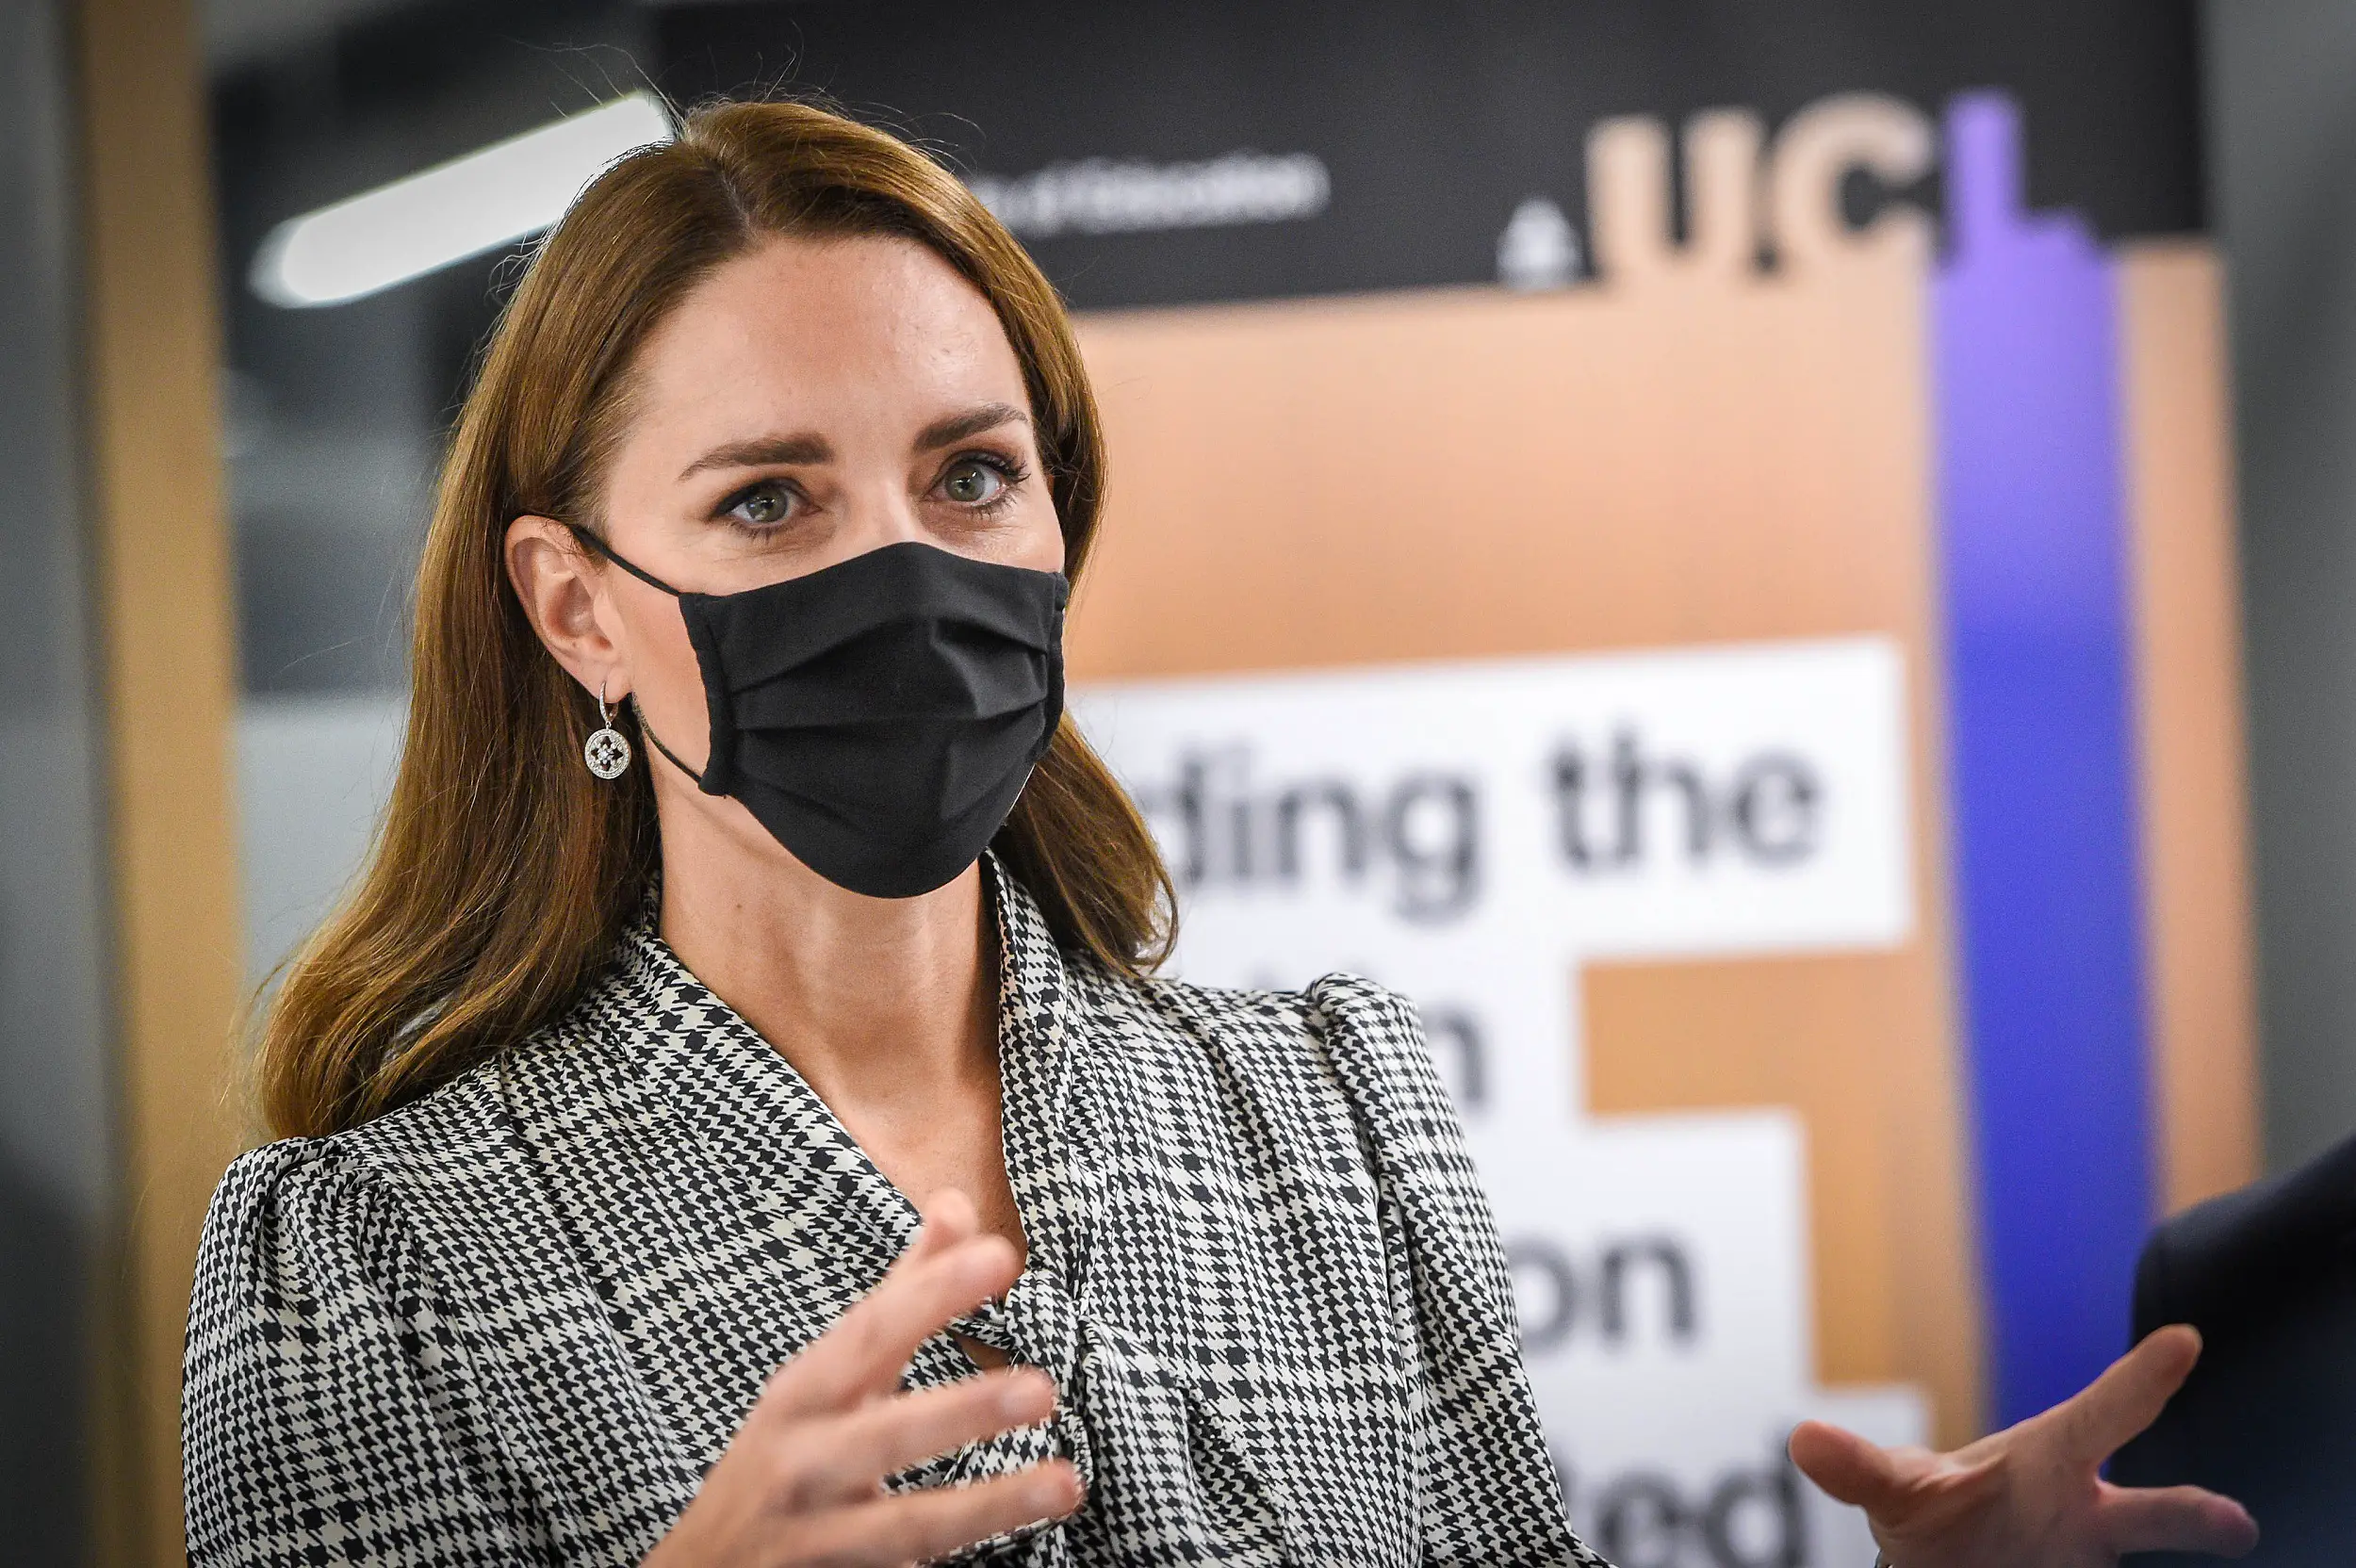 The Duchess of Cambridge visited UCL to learn about The 'Children of the 2020s'